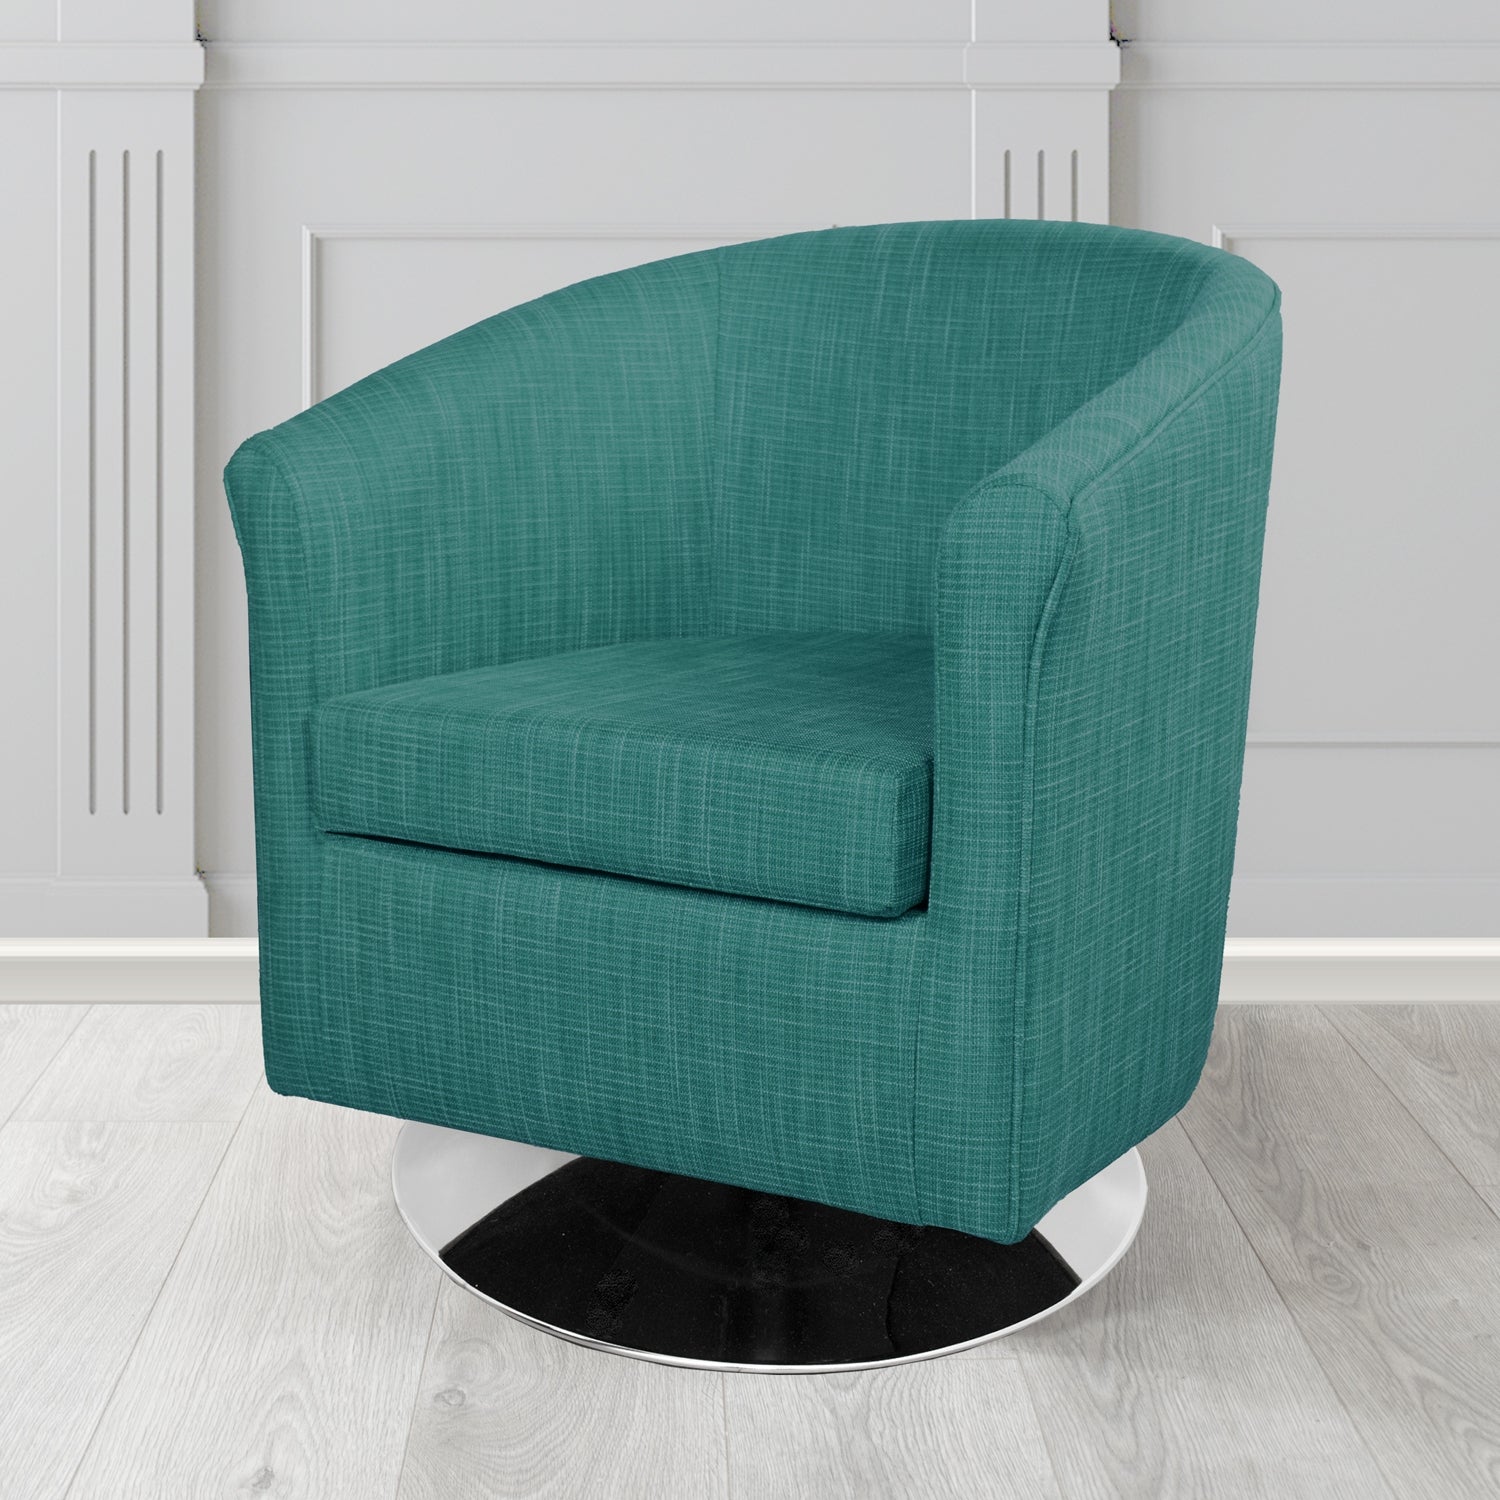 Tuscany Ravel Kingfisher Contract Crib 5 Fabric Swivel Tub Chair - Antimicrobial & Water-Resistant - The Tub Chair Shop